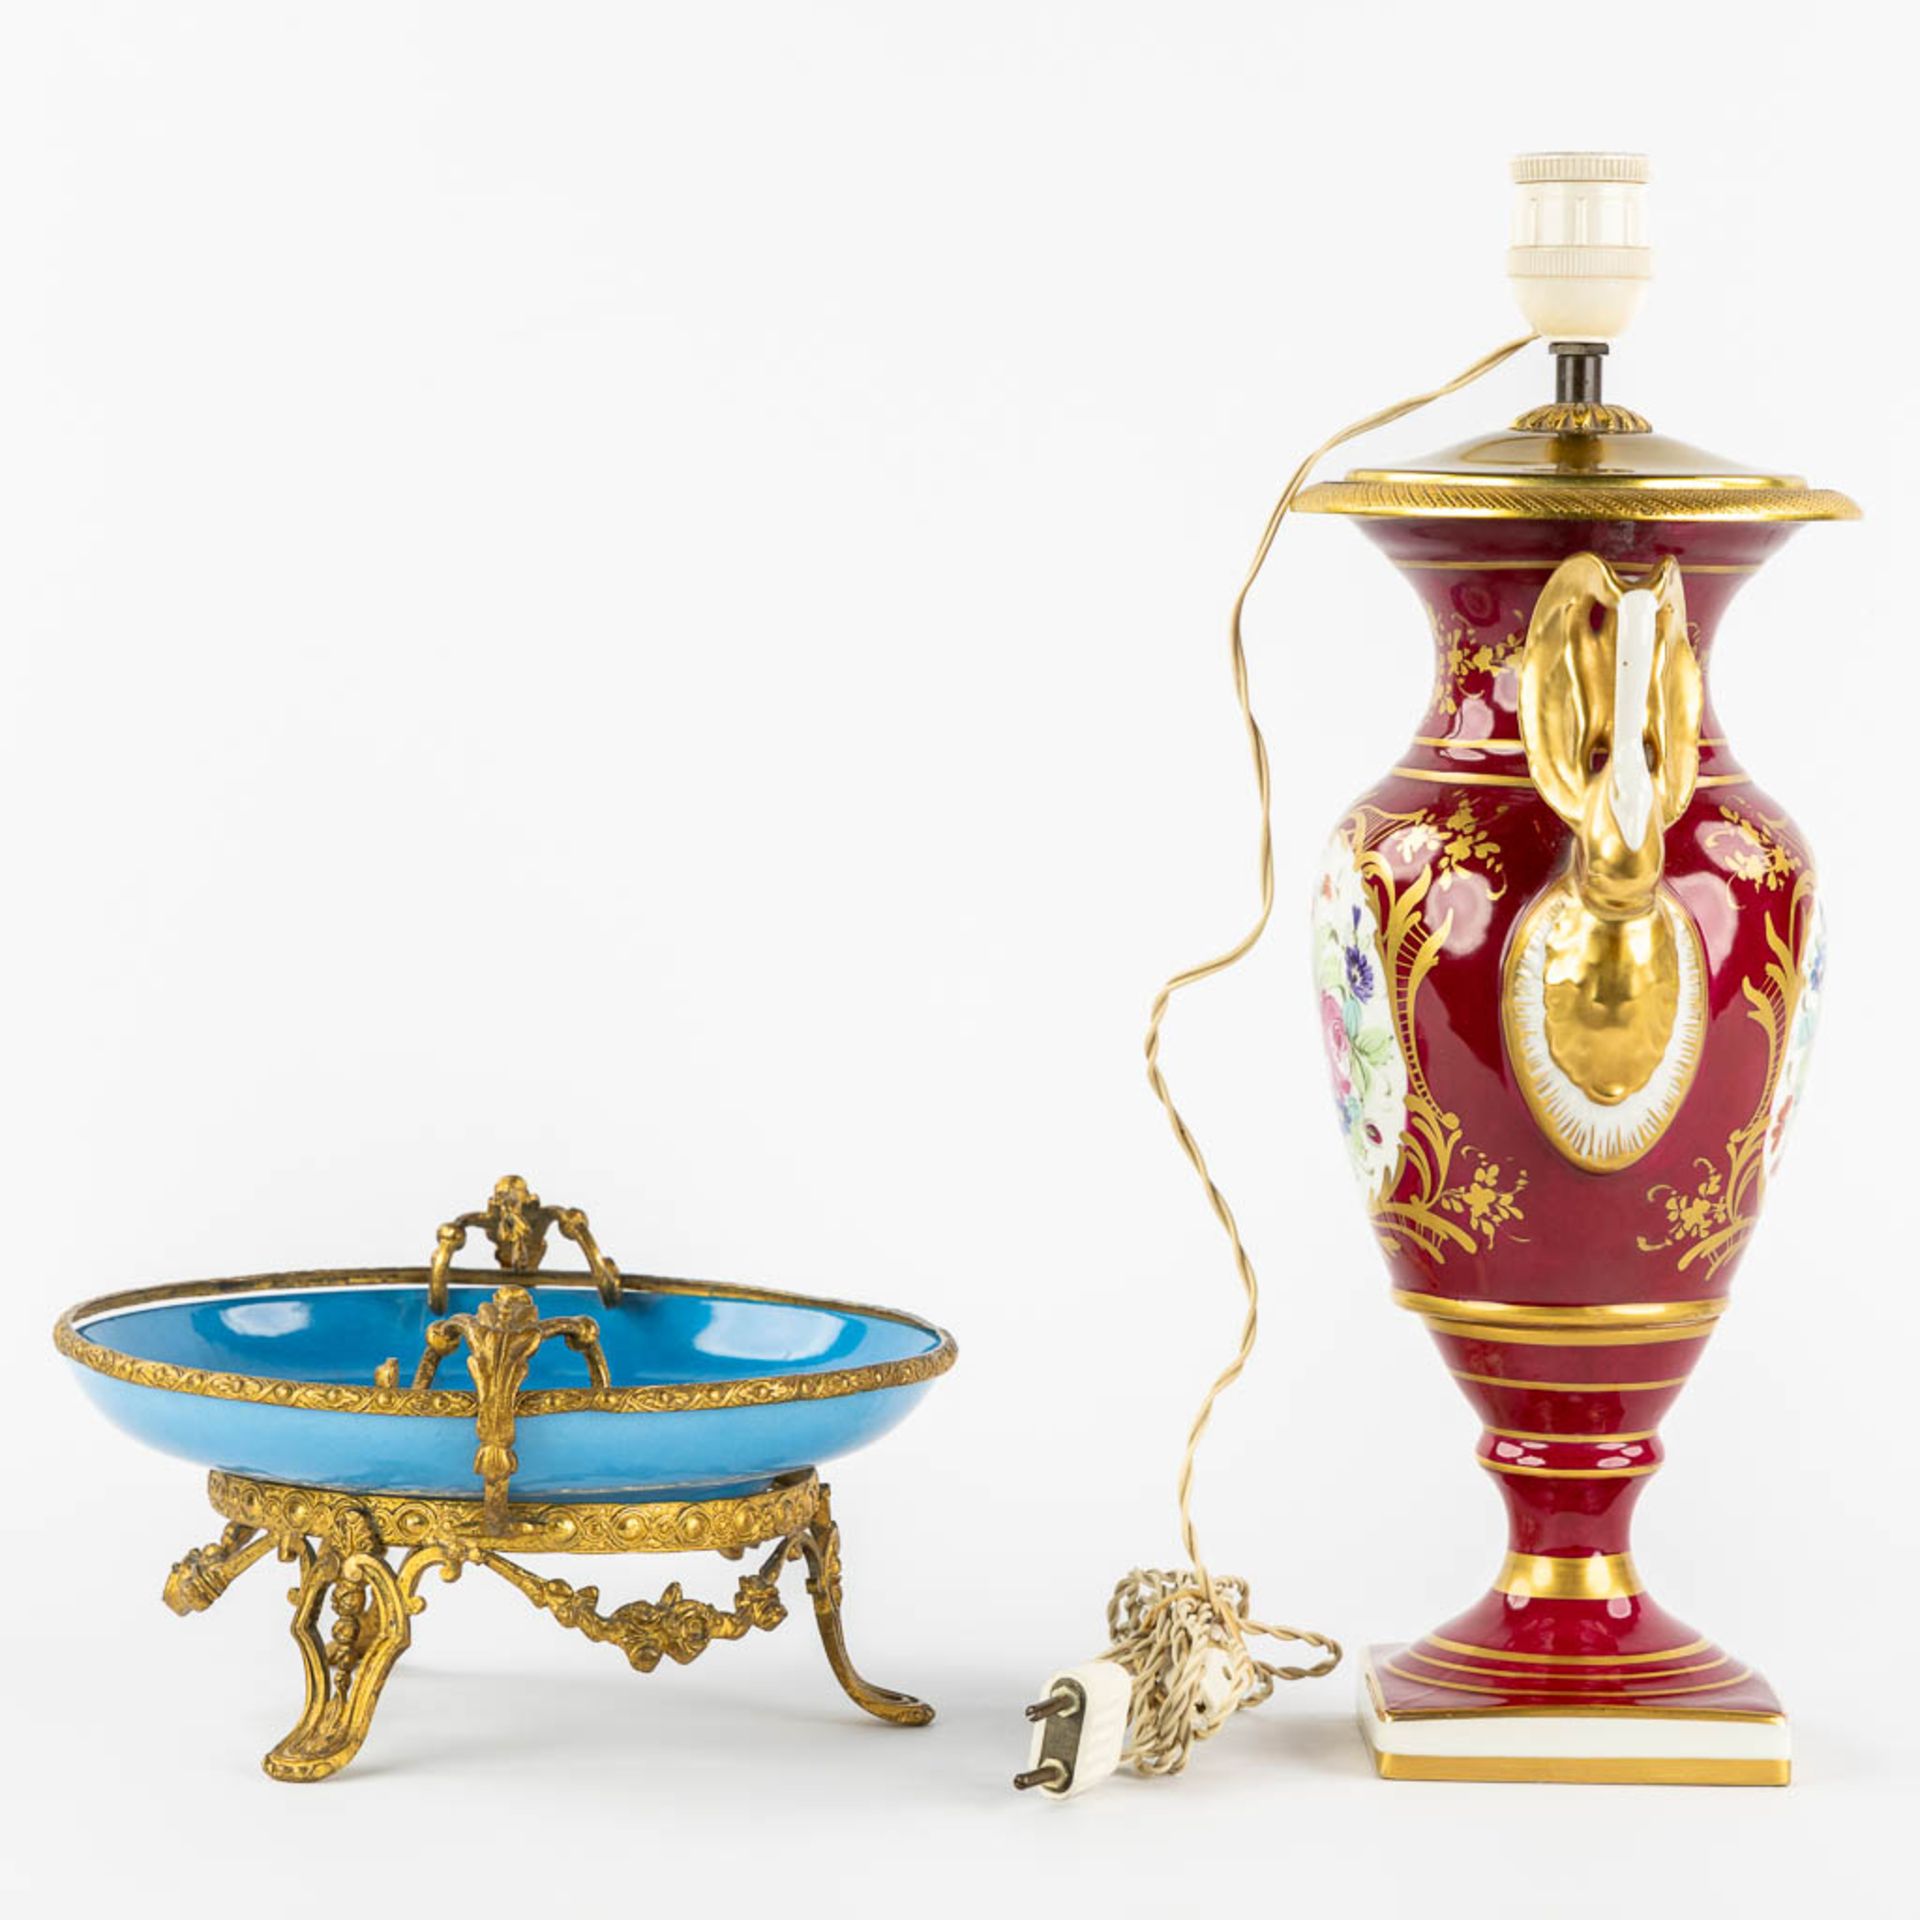 Limoges and Sèvres marks, a lamp base and a tazza with a hand-painted flower decor. (H:40 cm) - Image 6 of 14